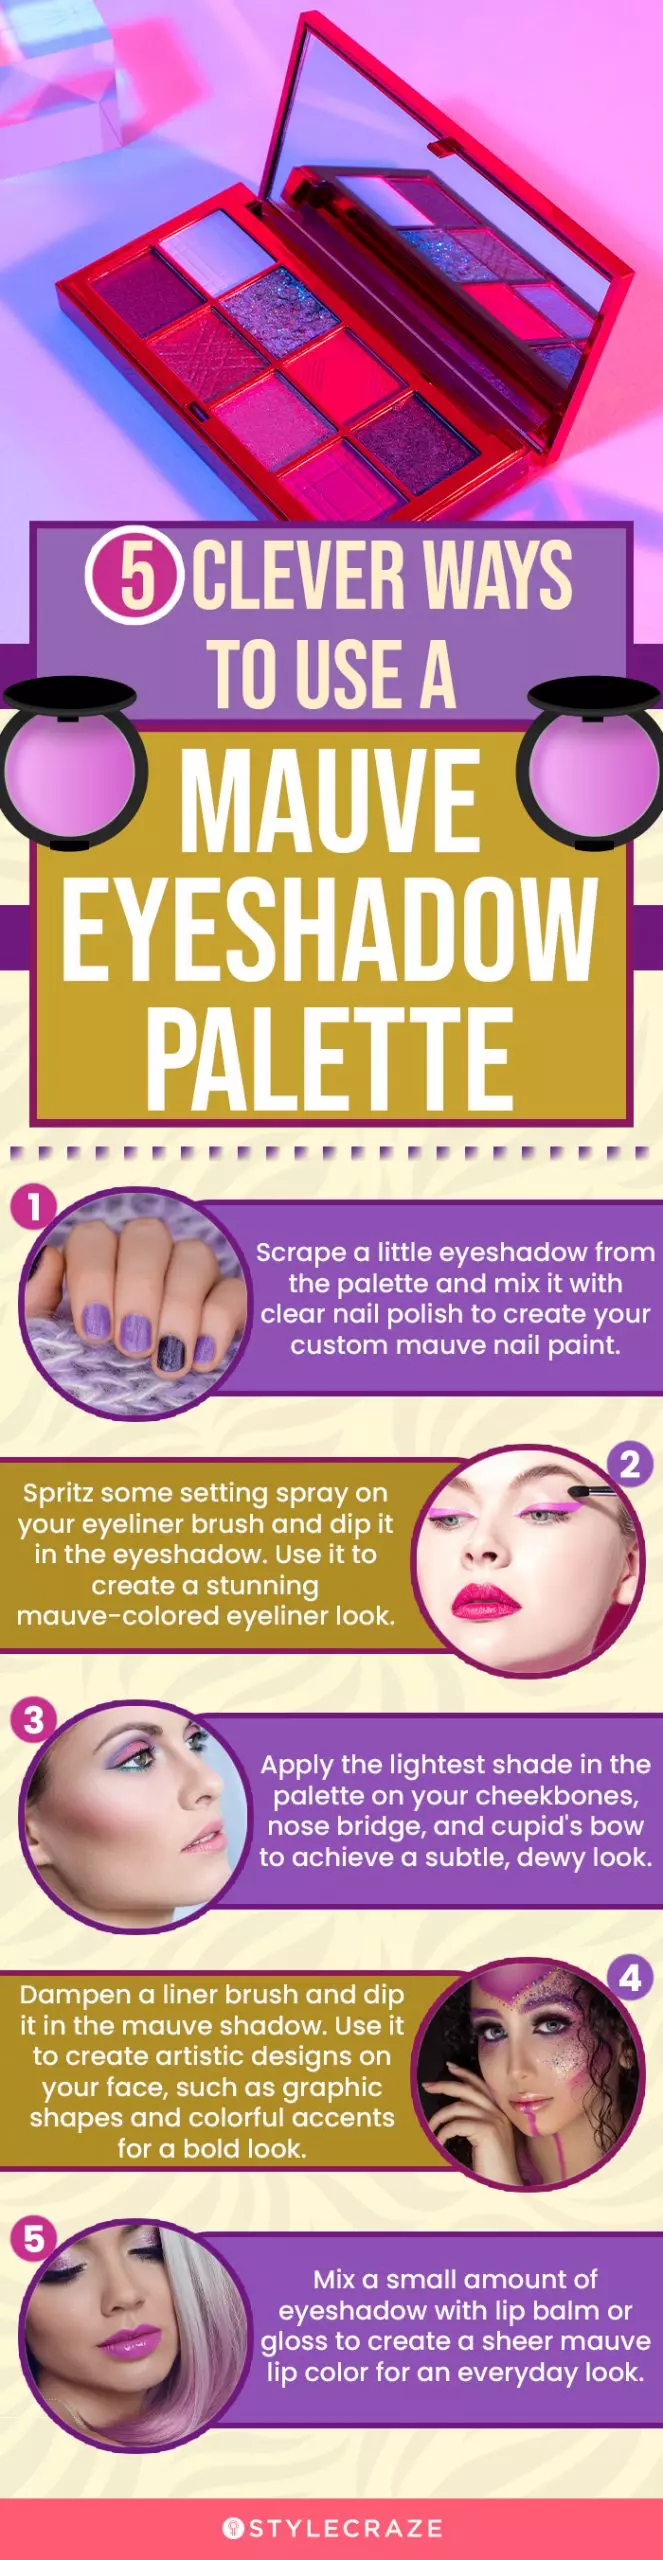 5 Clever Ways To Use Your Mauve Eyeshadow Palettes (infographic)